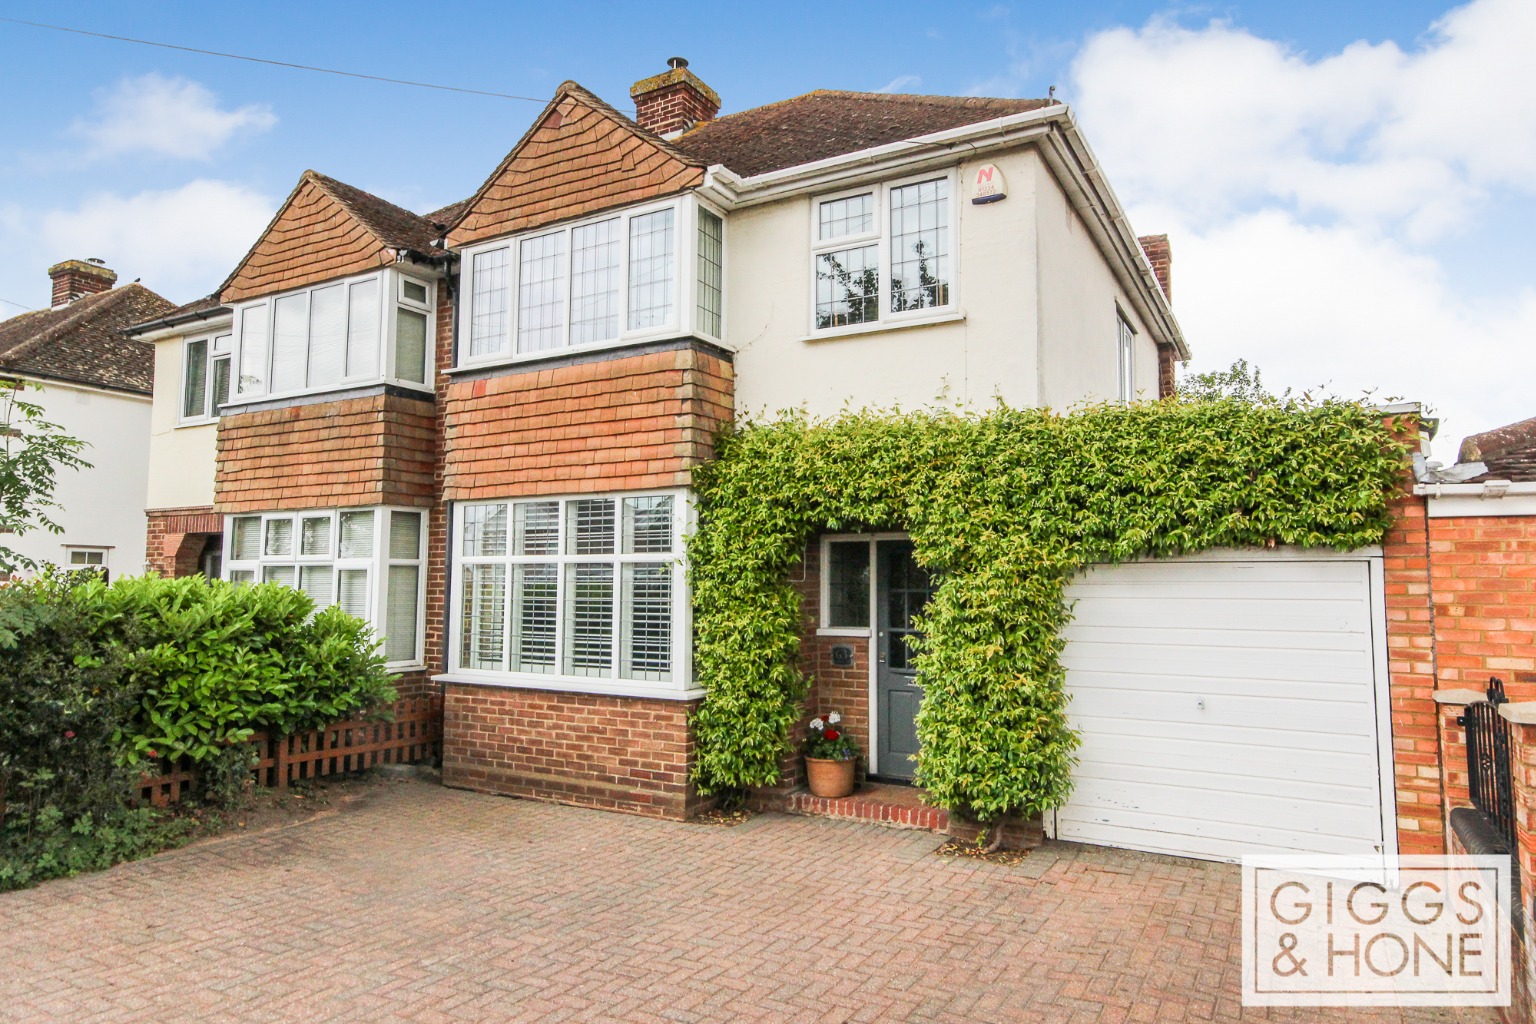 An outstanding extended three bedroom semi detached family home located on the popular Barkers Lane. Entering the property you are greeted with a light and airy entrance hall which leads to a bay fronted lounge with a feature log burner, at the heart of the home is a fabulous kitchen/dining room wit